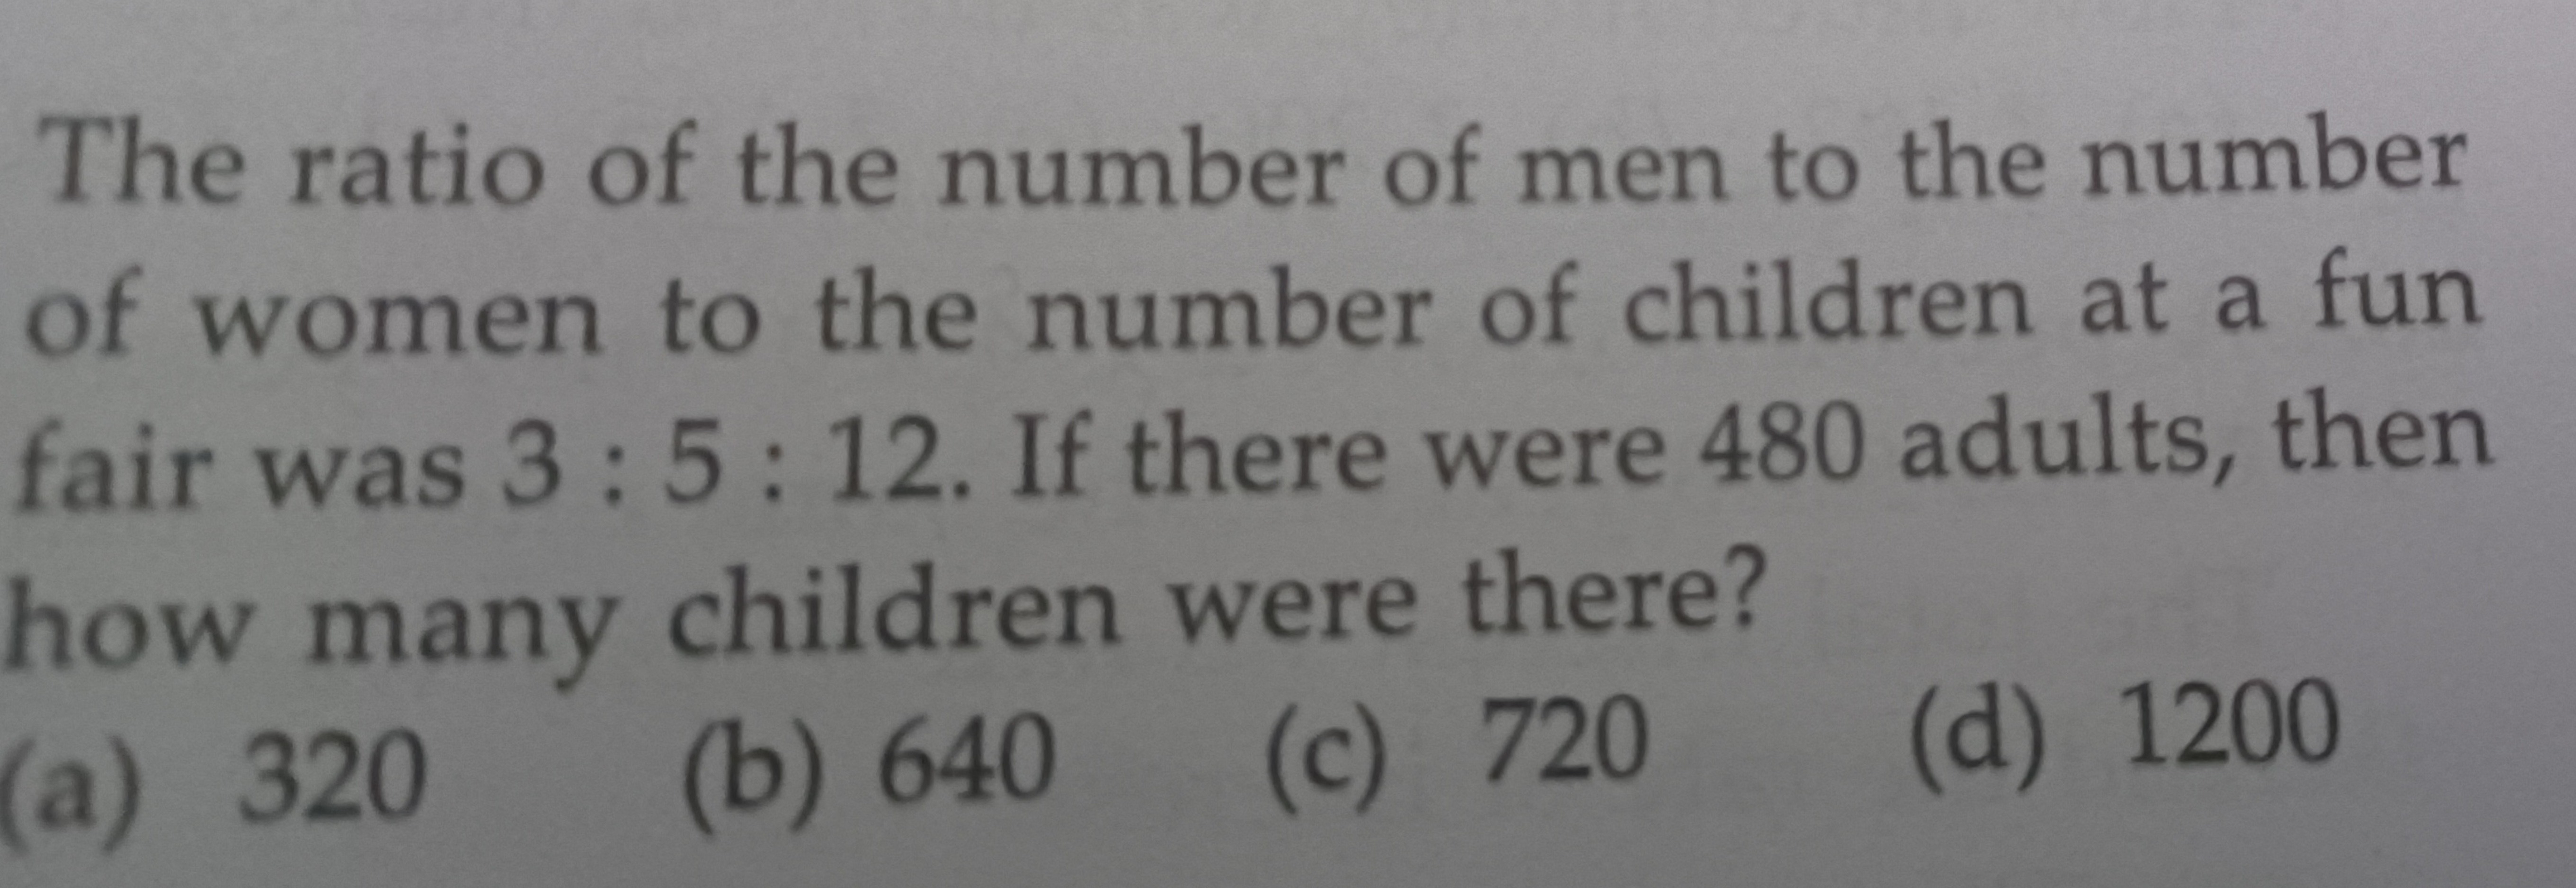 The ratio of the number of men to the number of women to the number of